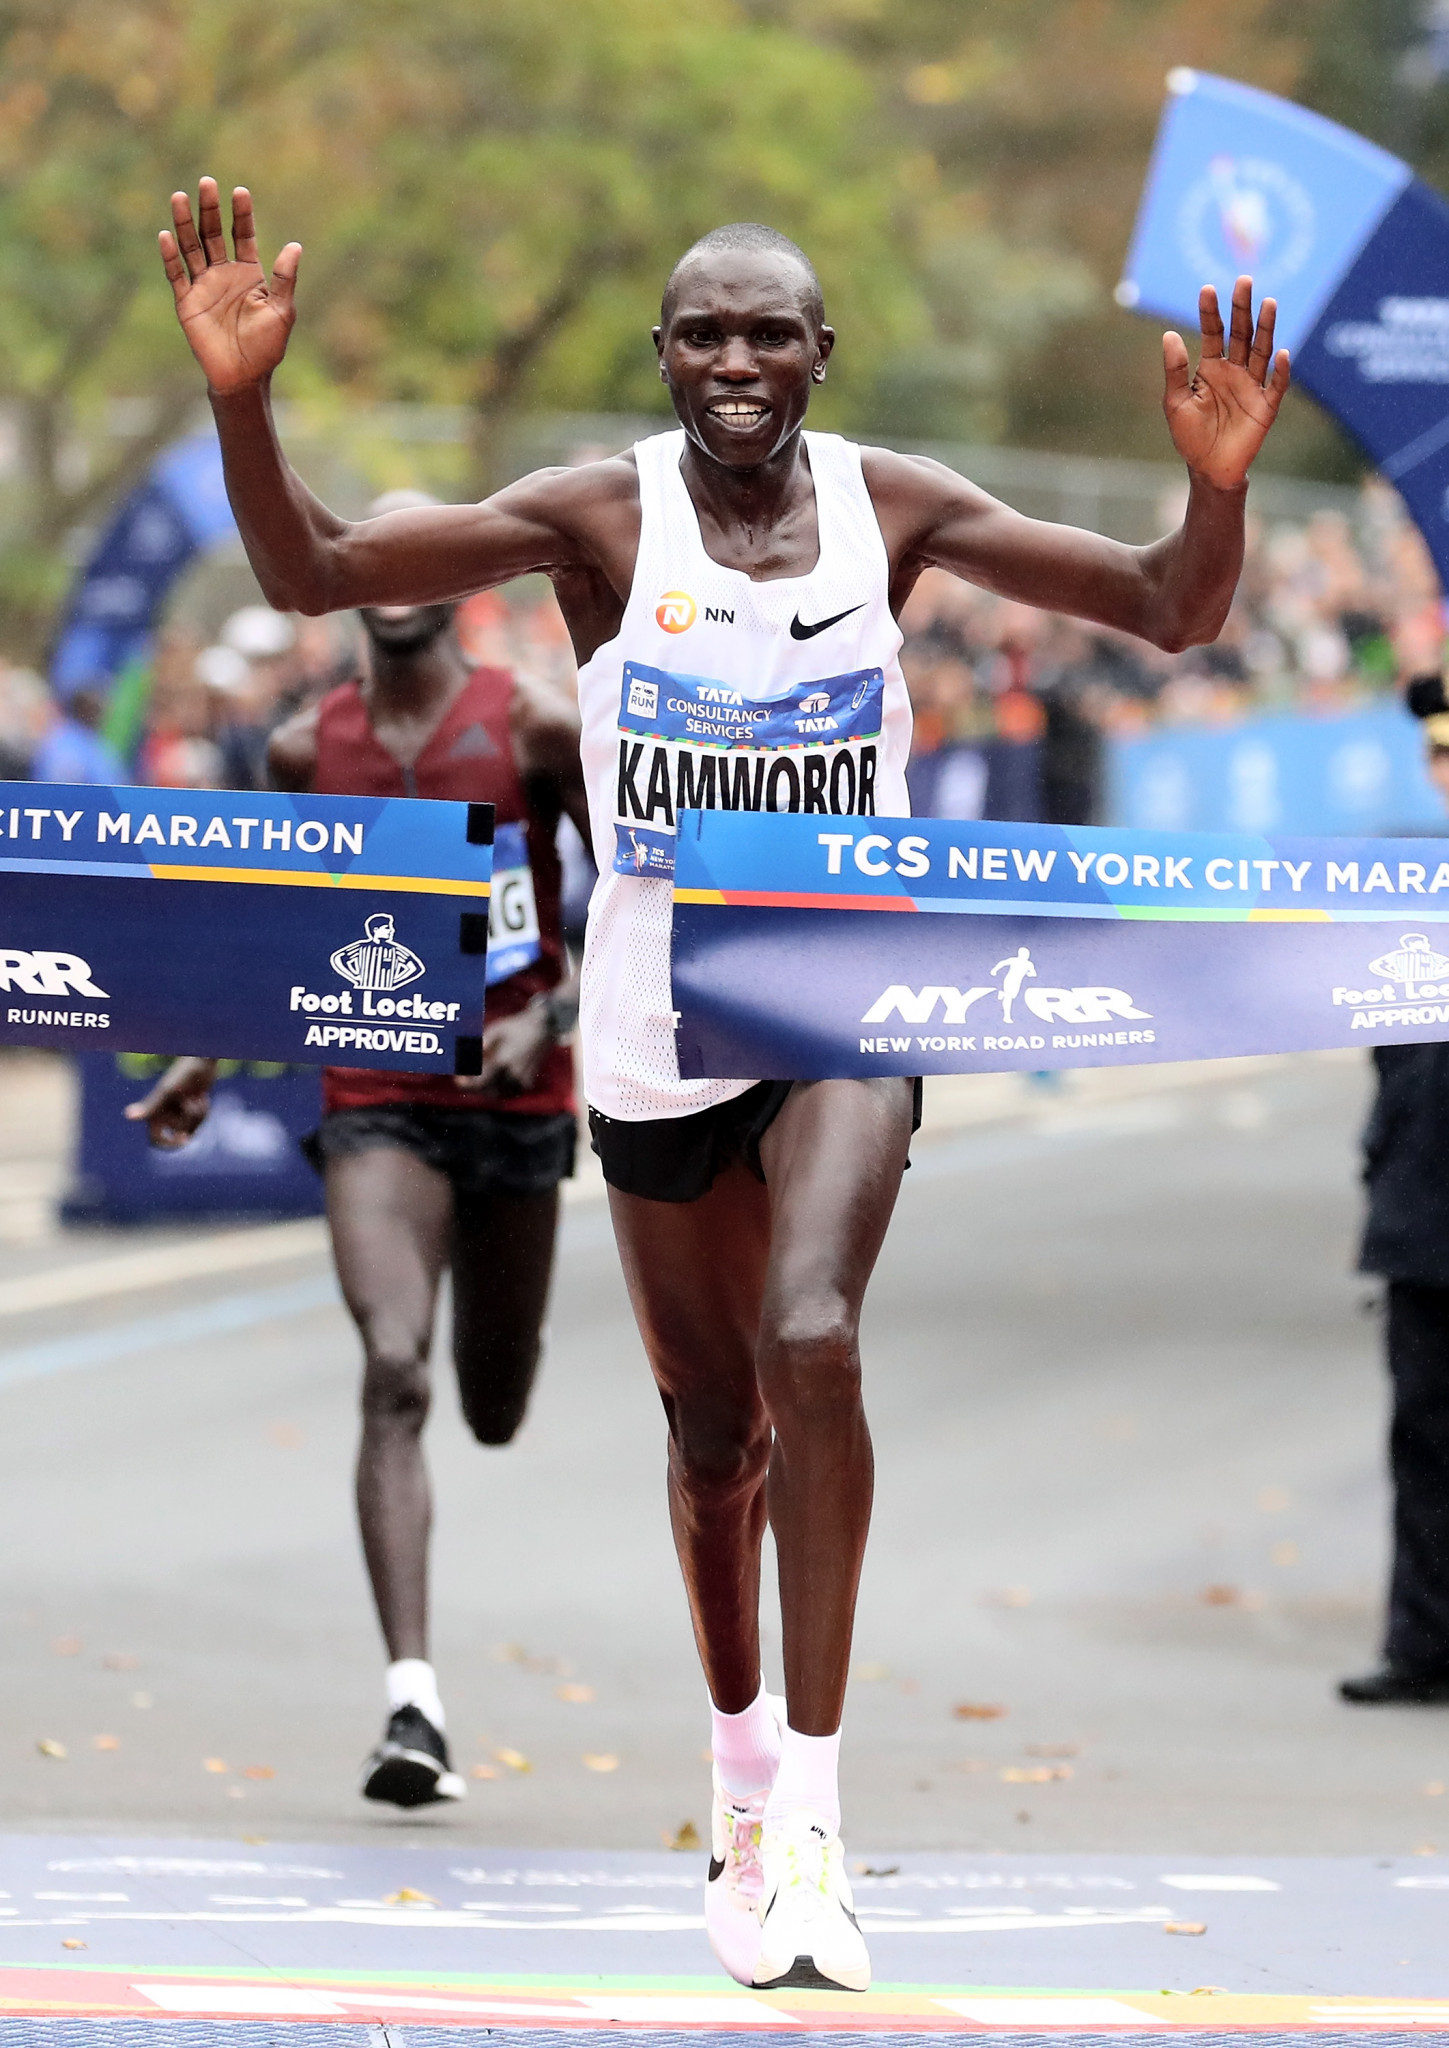 Geoffrey Kamworor, of Kenya, crosses the finish line as he wins the 2017 New York City Marathon in Central Park ©Getty Images